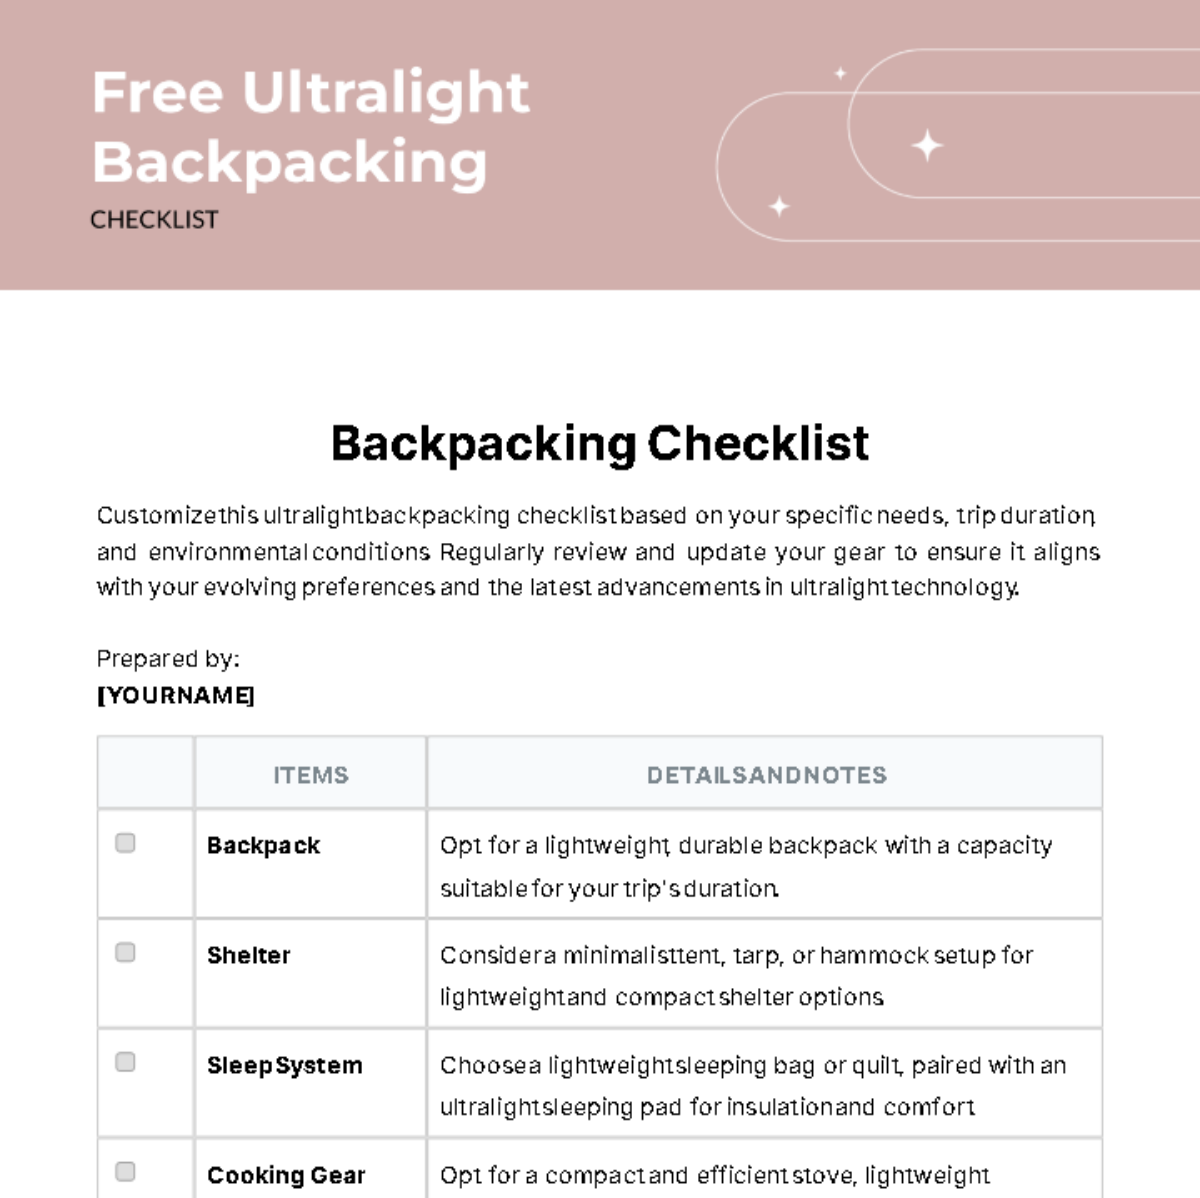 Free Ultralight Backpacking Checklist Template